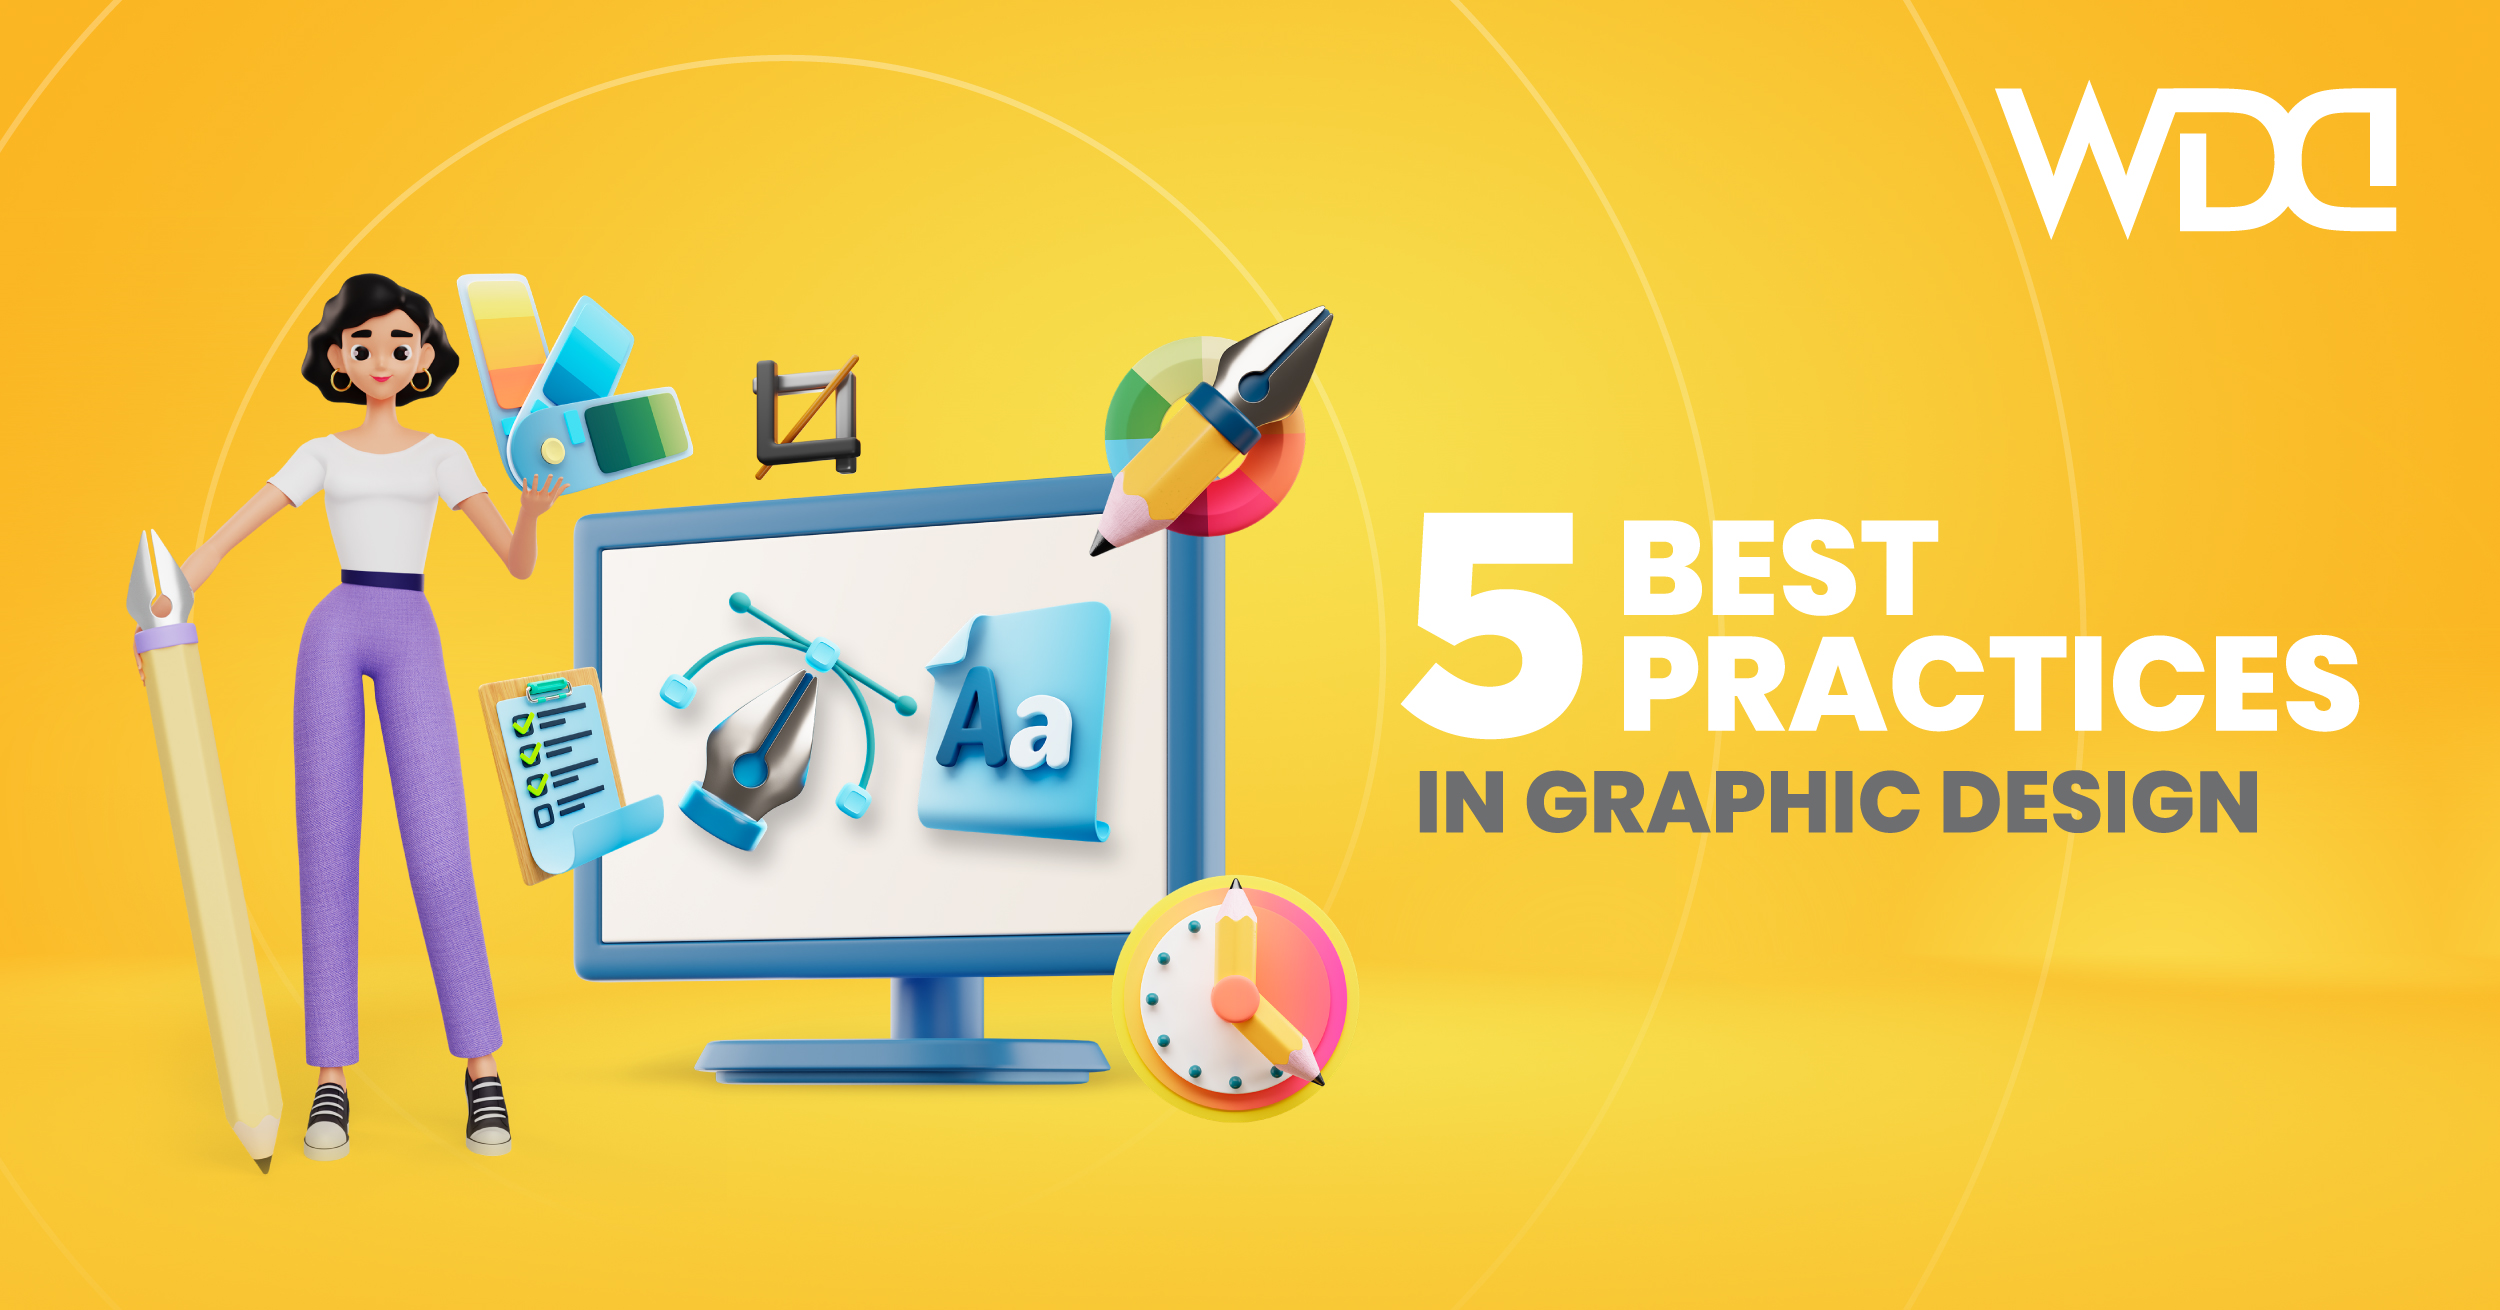 THE 5 BEST PRACTICES IN GRAPHIC DESIGN